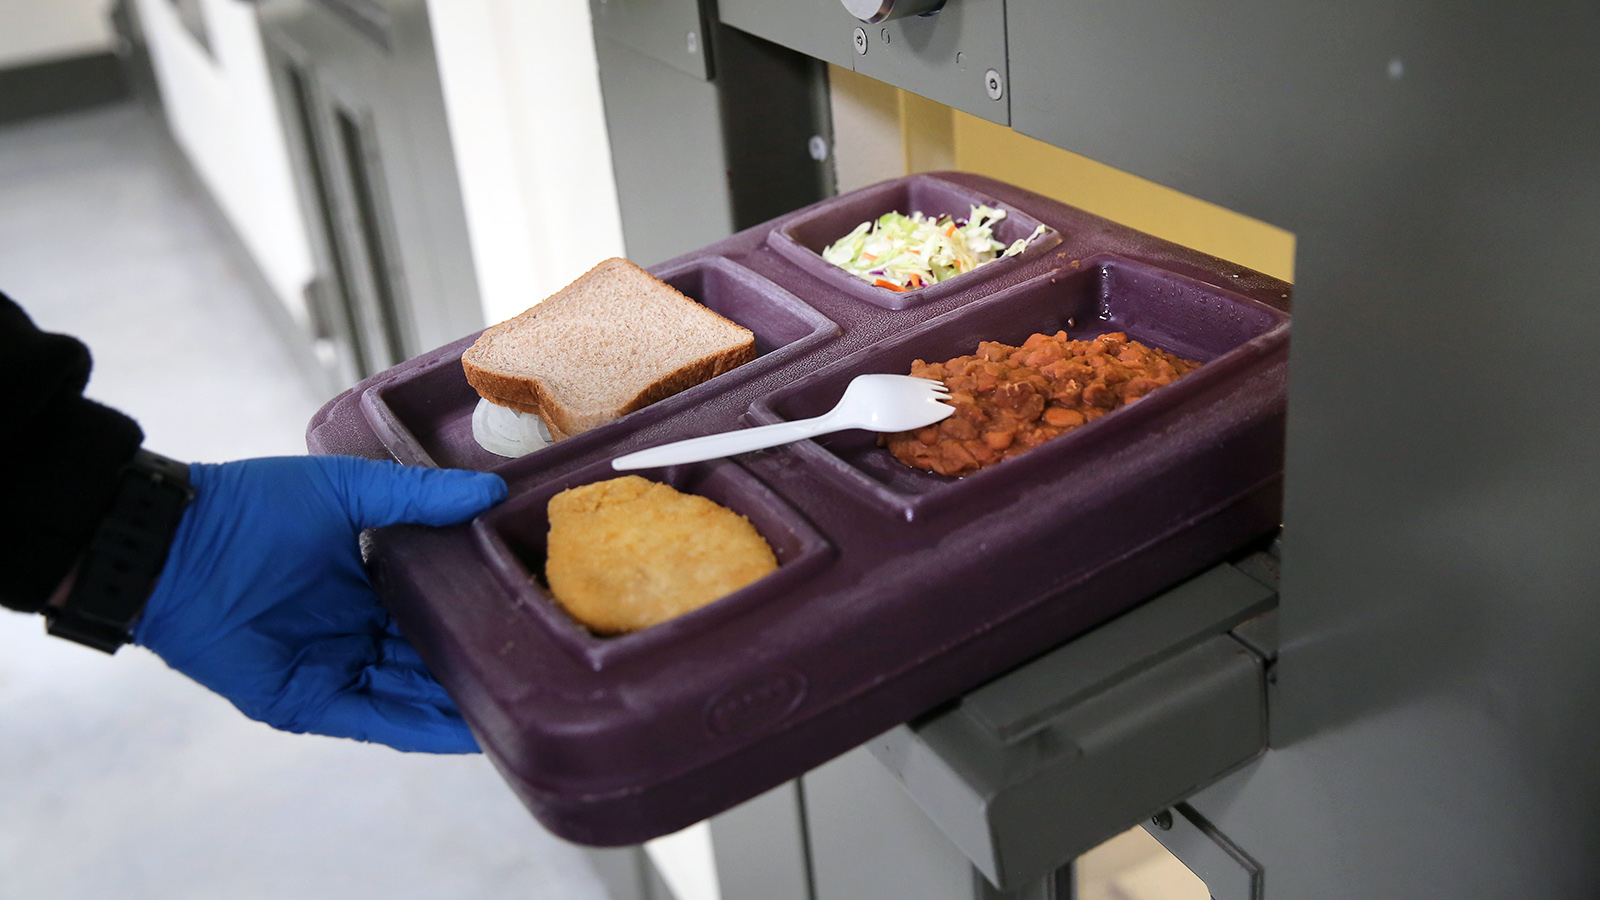 Santa Clara County jails need $1.5 million to keep up with food price increases